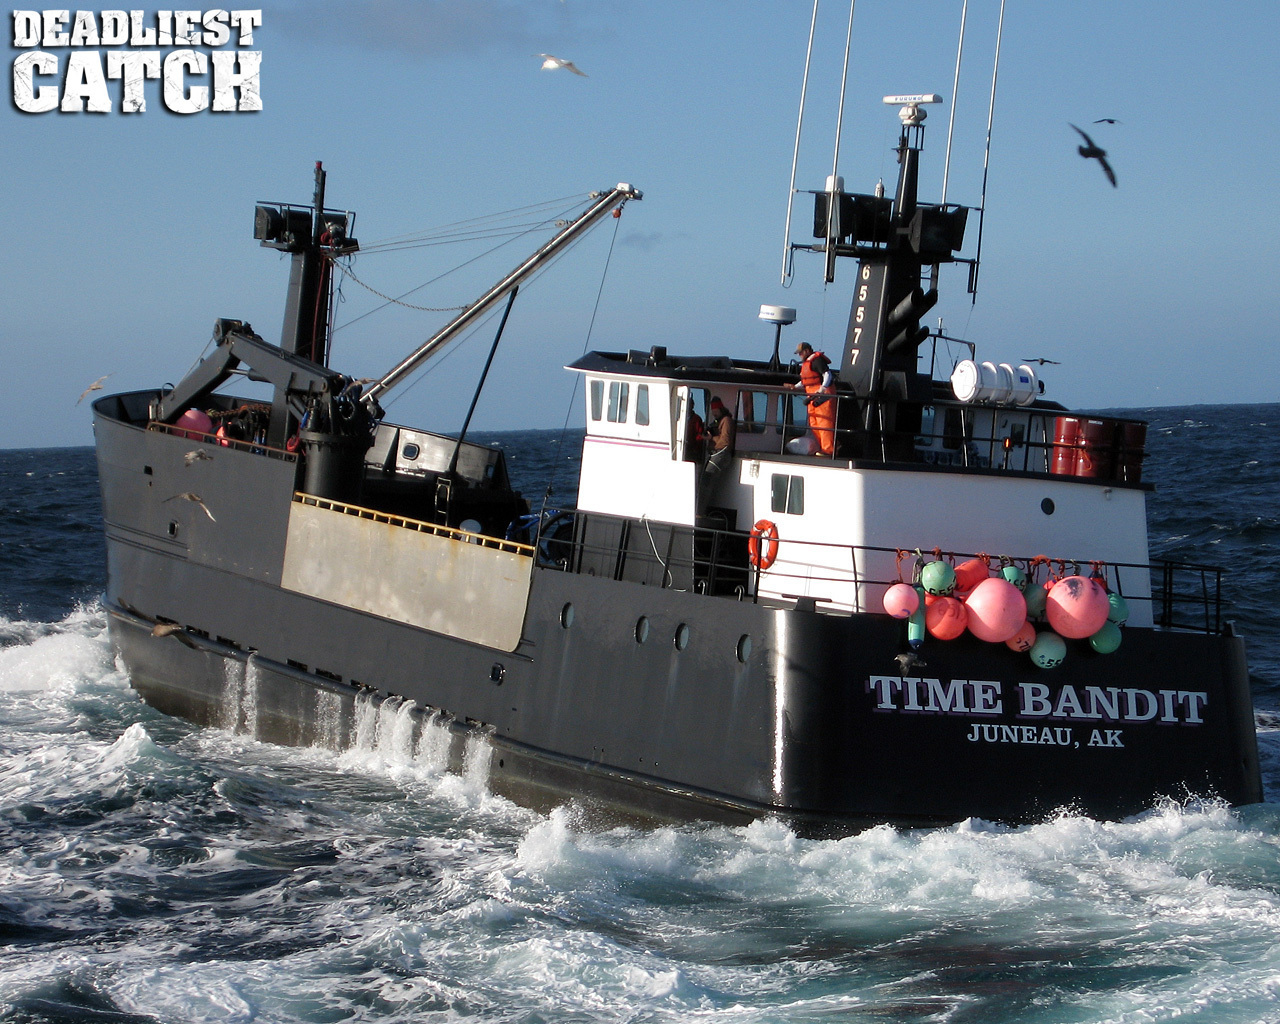 Deadliest Catch Image Time Bandit HD Wallpaper And